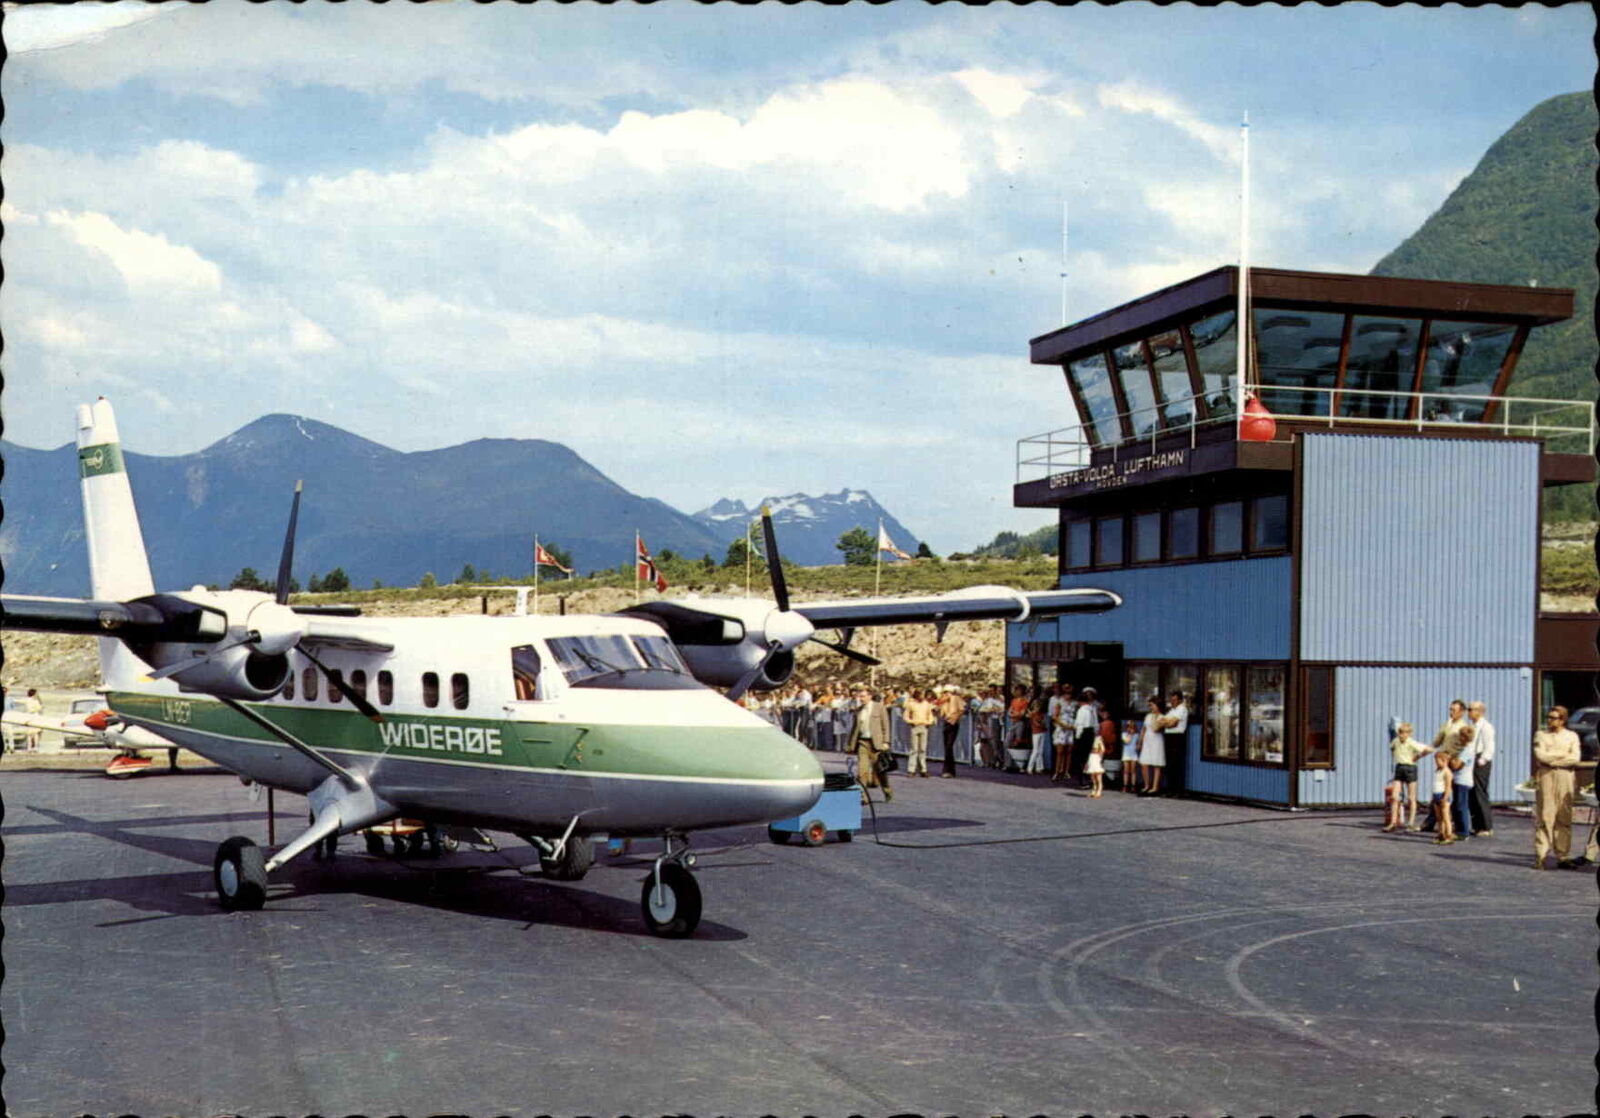 Orsta Havden Norway Airport Wideroe Airline Twin Otter DHC-6 Airplane Postcard